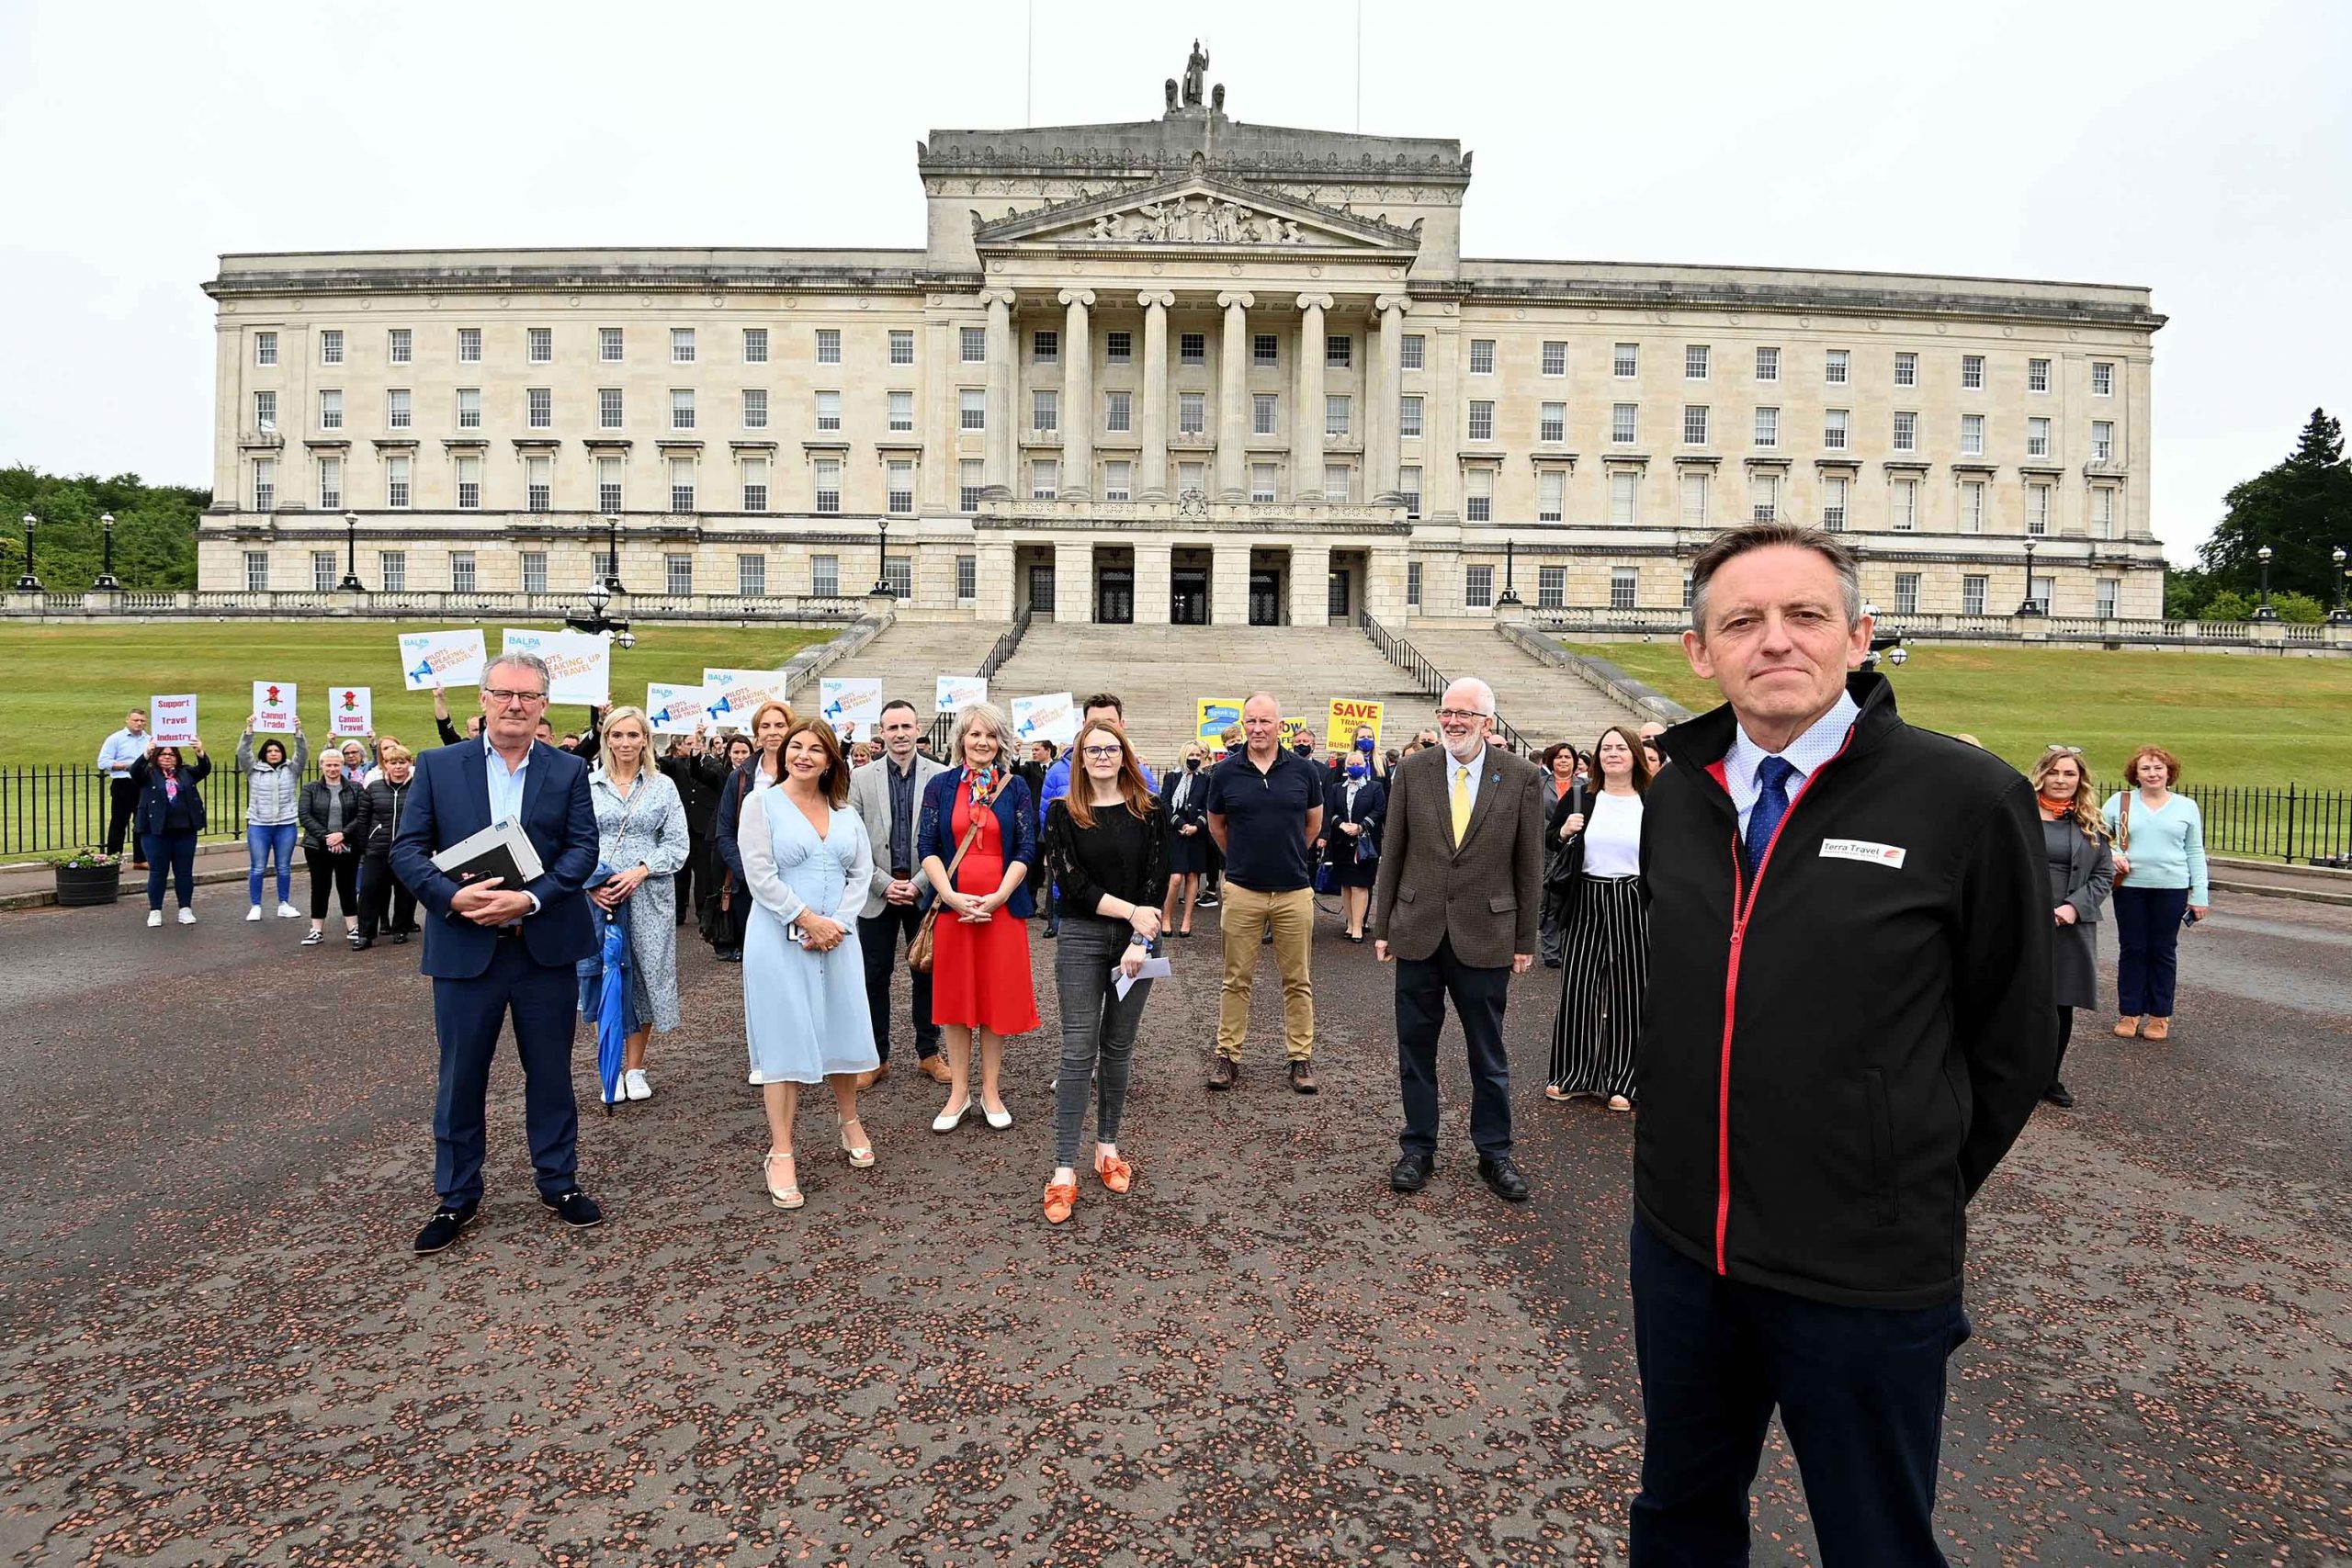 Travel industry reps UNITE at Stormont to call for reopening